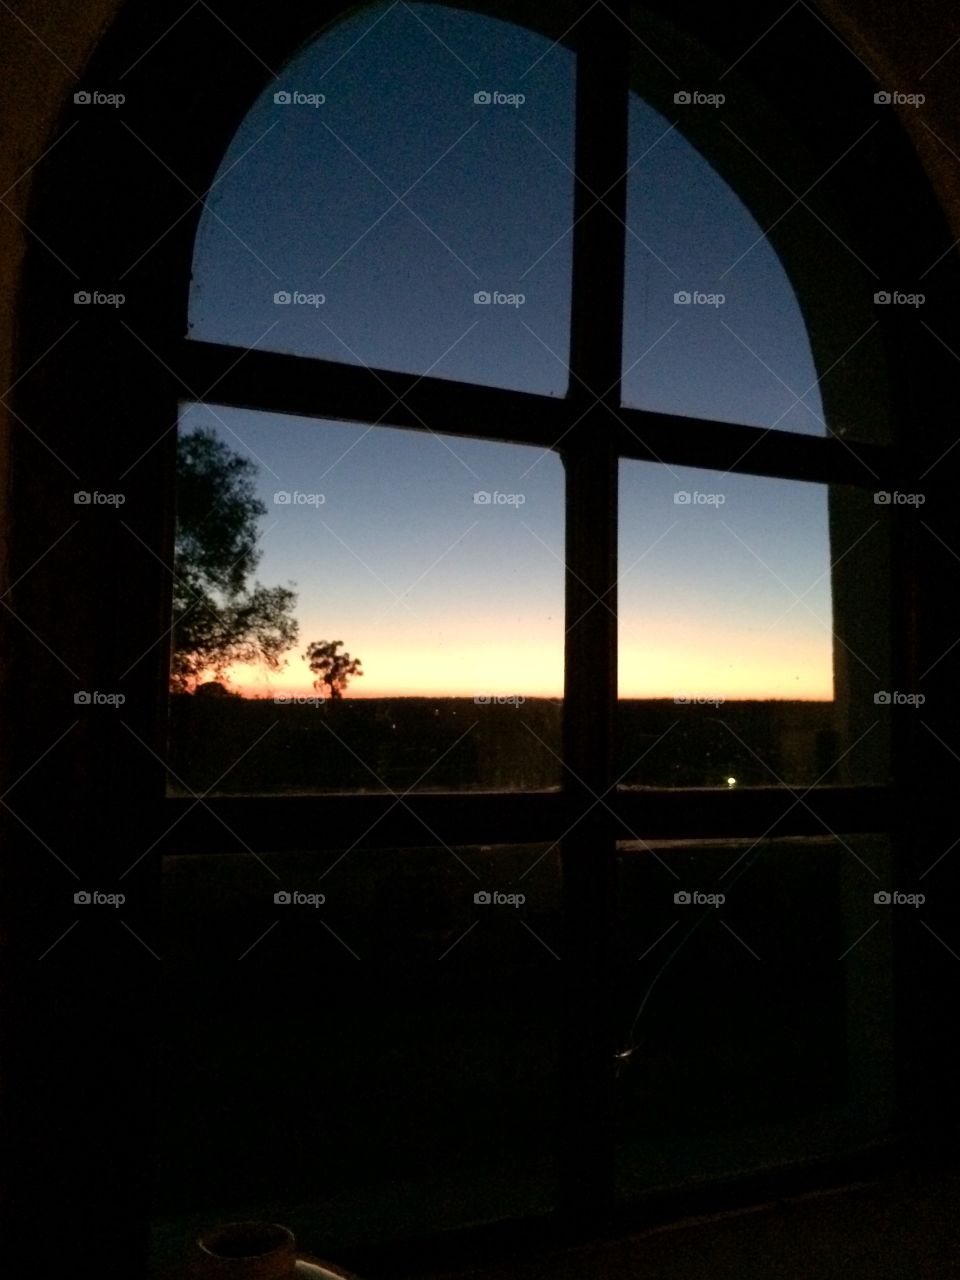 View of a sunset through the window at Monte das Hortas, Portugal.